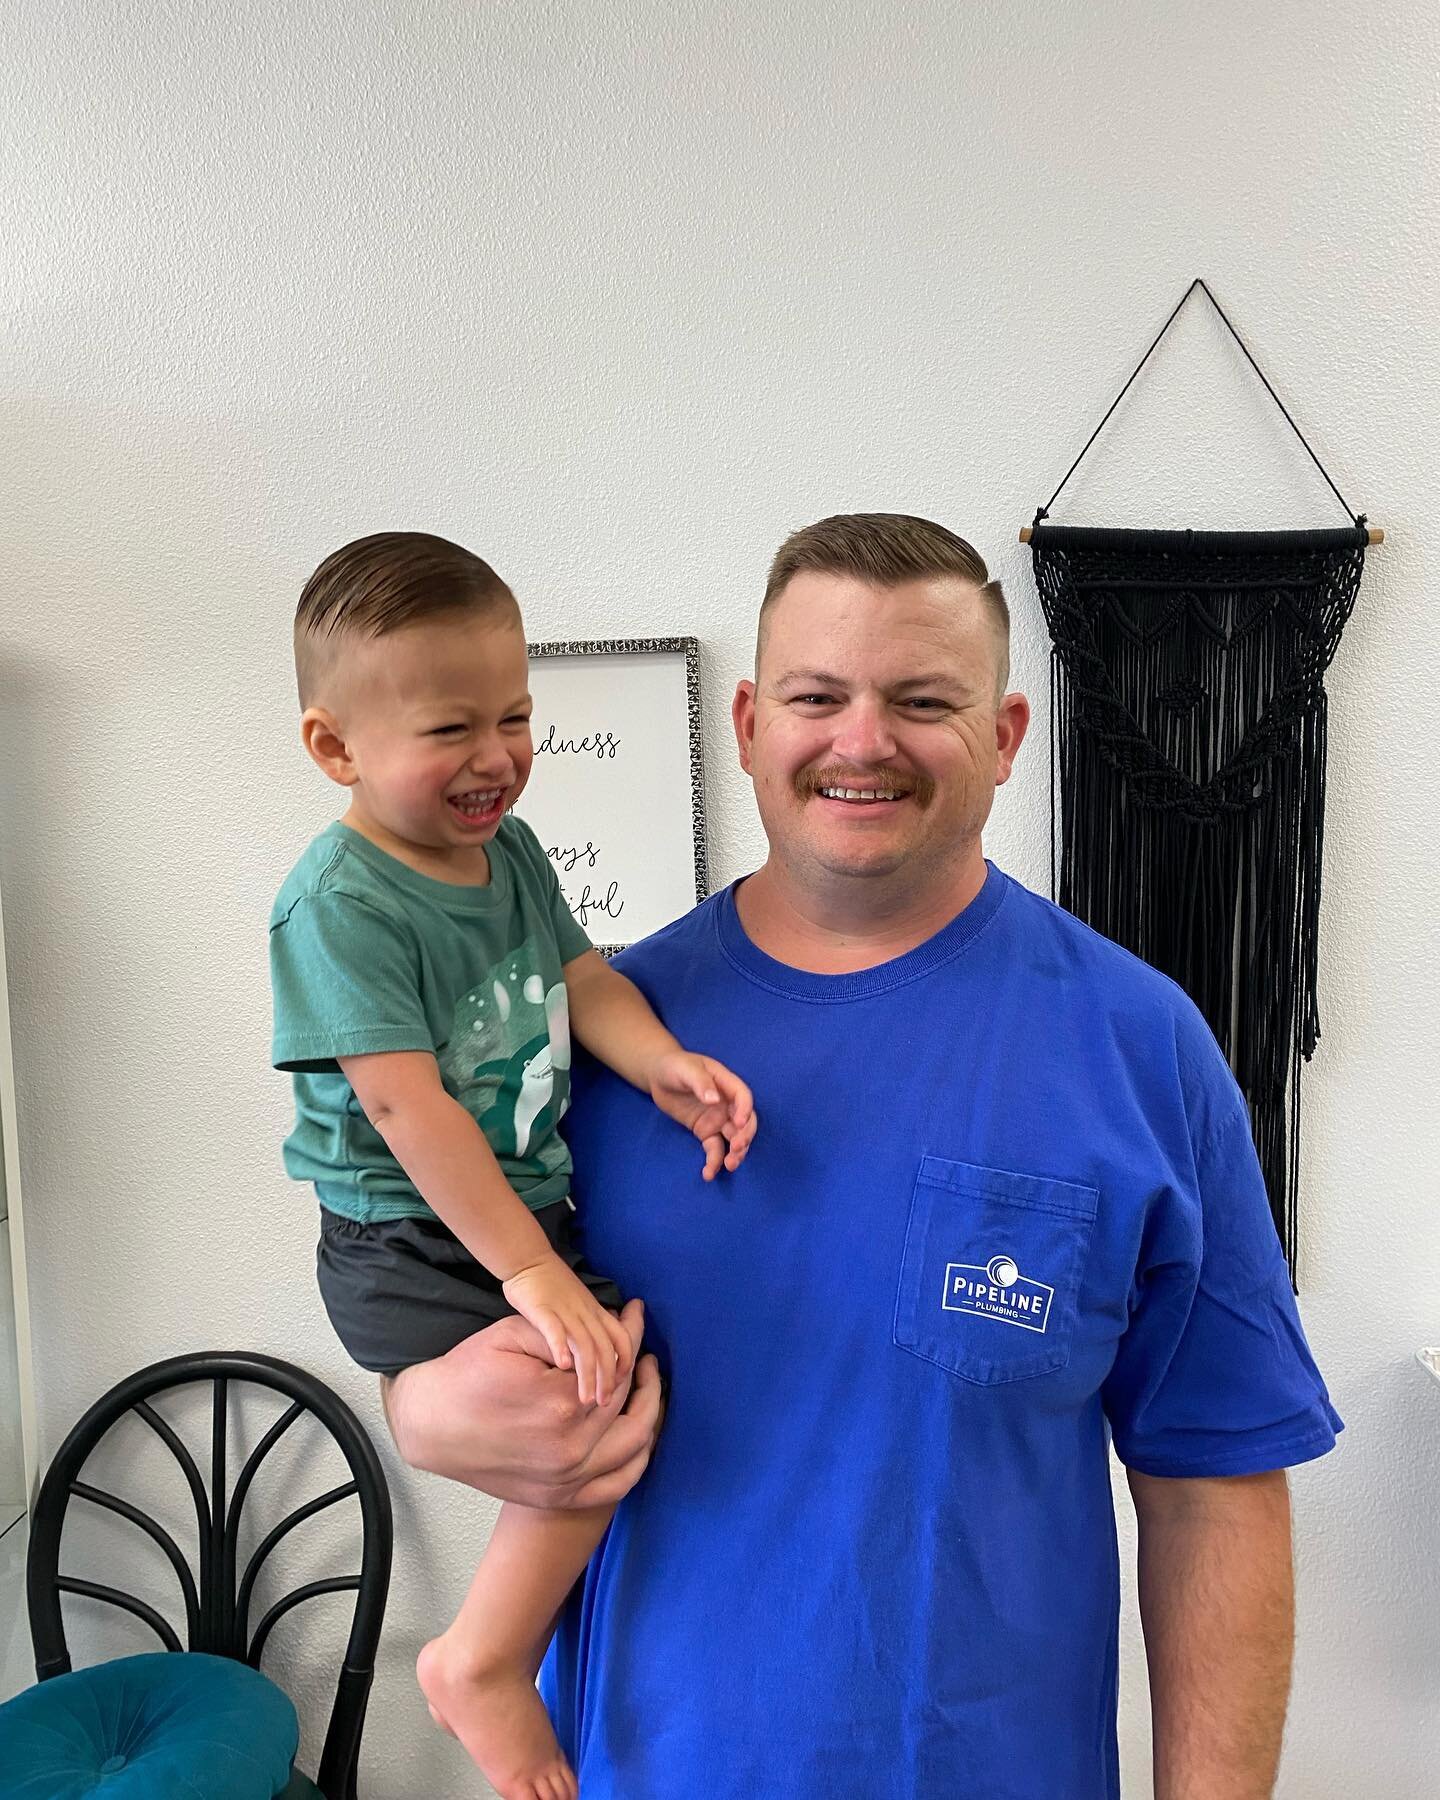 @kamieroundybeauty &hellip;.Happy Father&rsquo;s Day this weekend!Come in and visit us if you&rsquo;re a dude, or a dad. We&rsquo;d love to make you feel great for the weekend! #happyfathersday